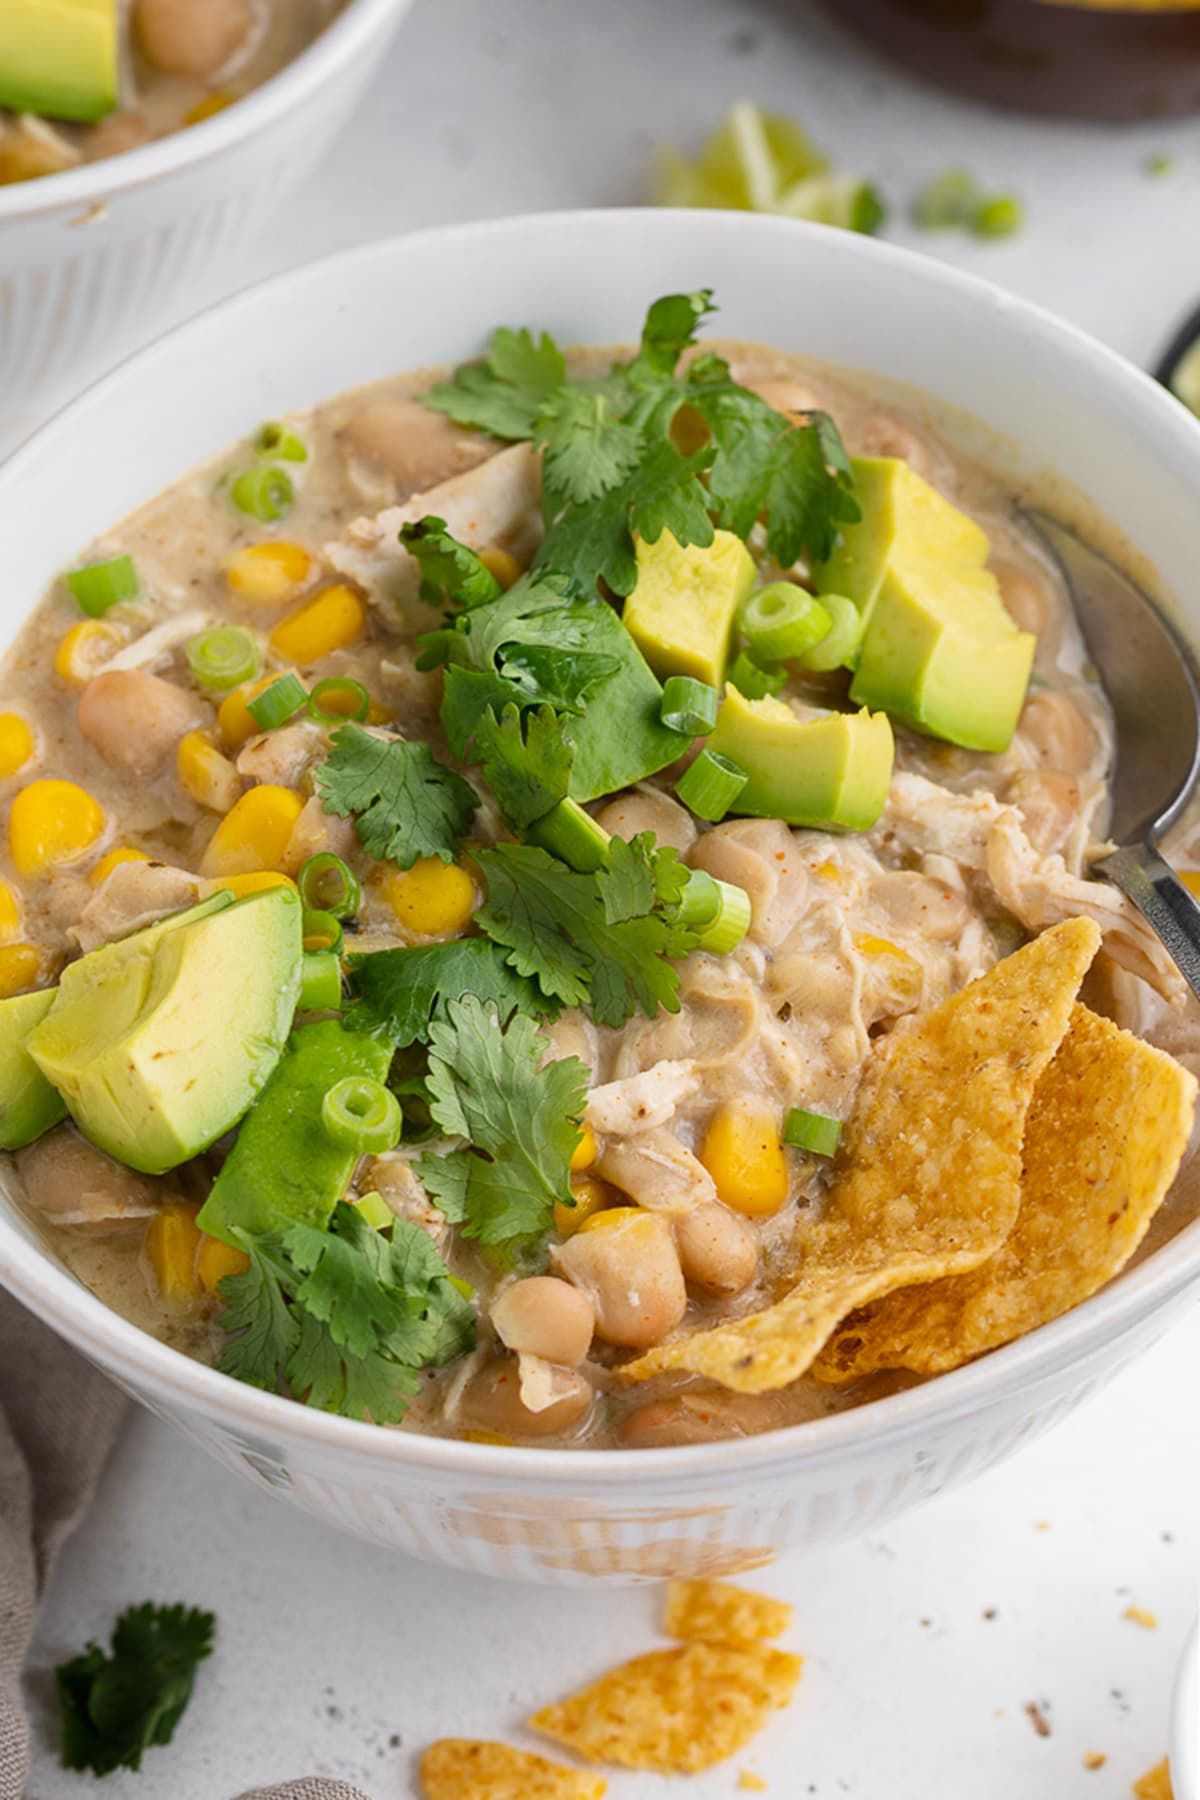 Angled view of a bowl of Instant Pot white chicken chili topped with avocado, cilantro, and tortilla chips.